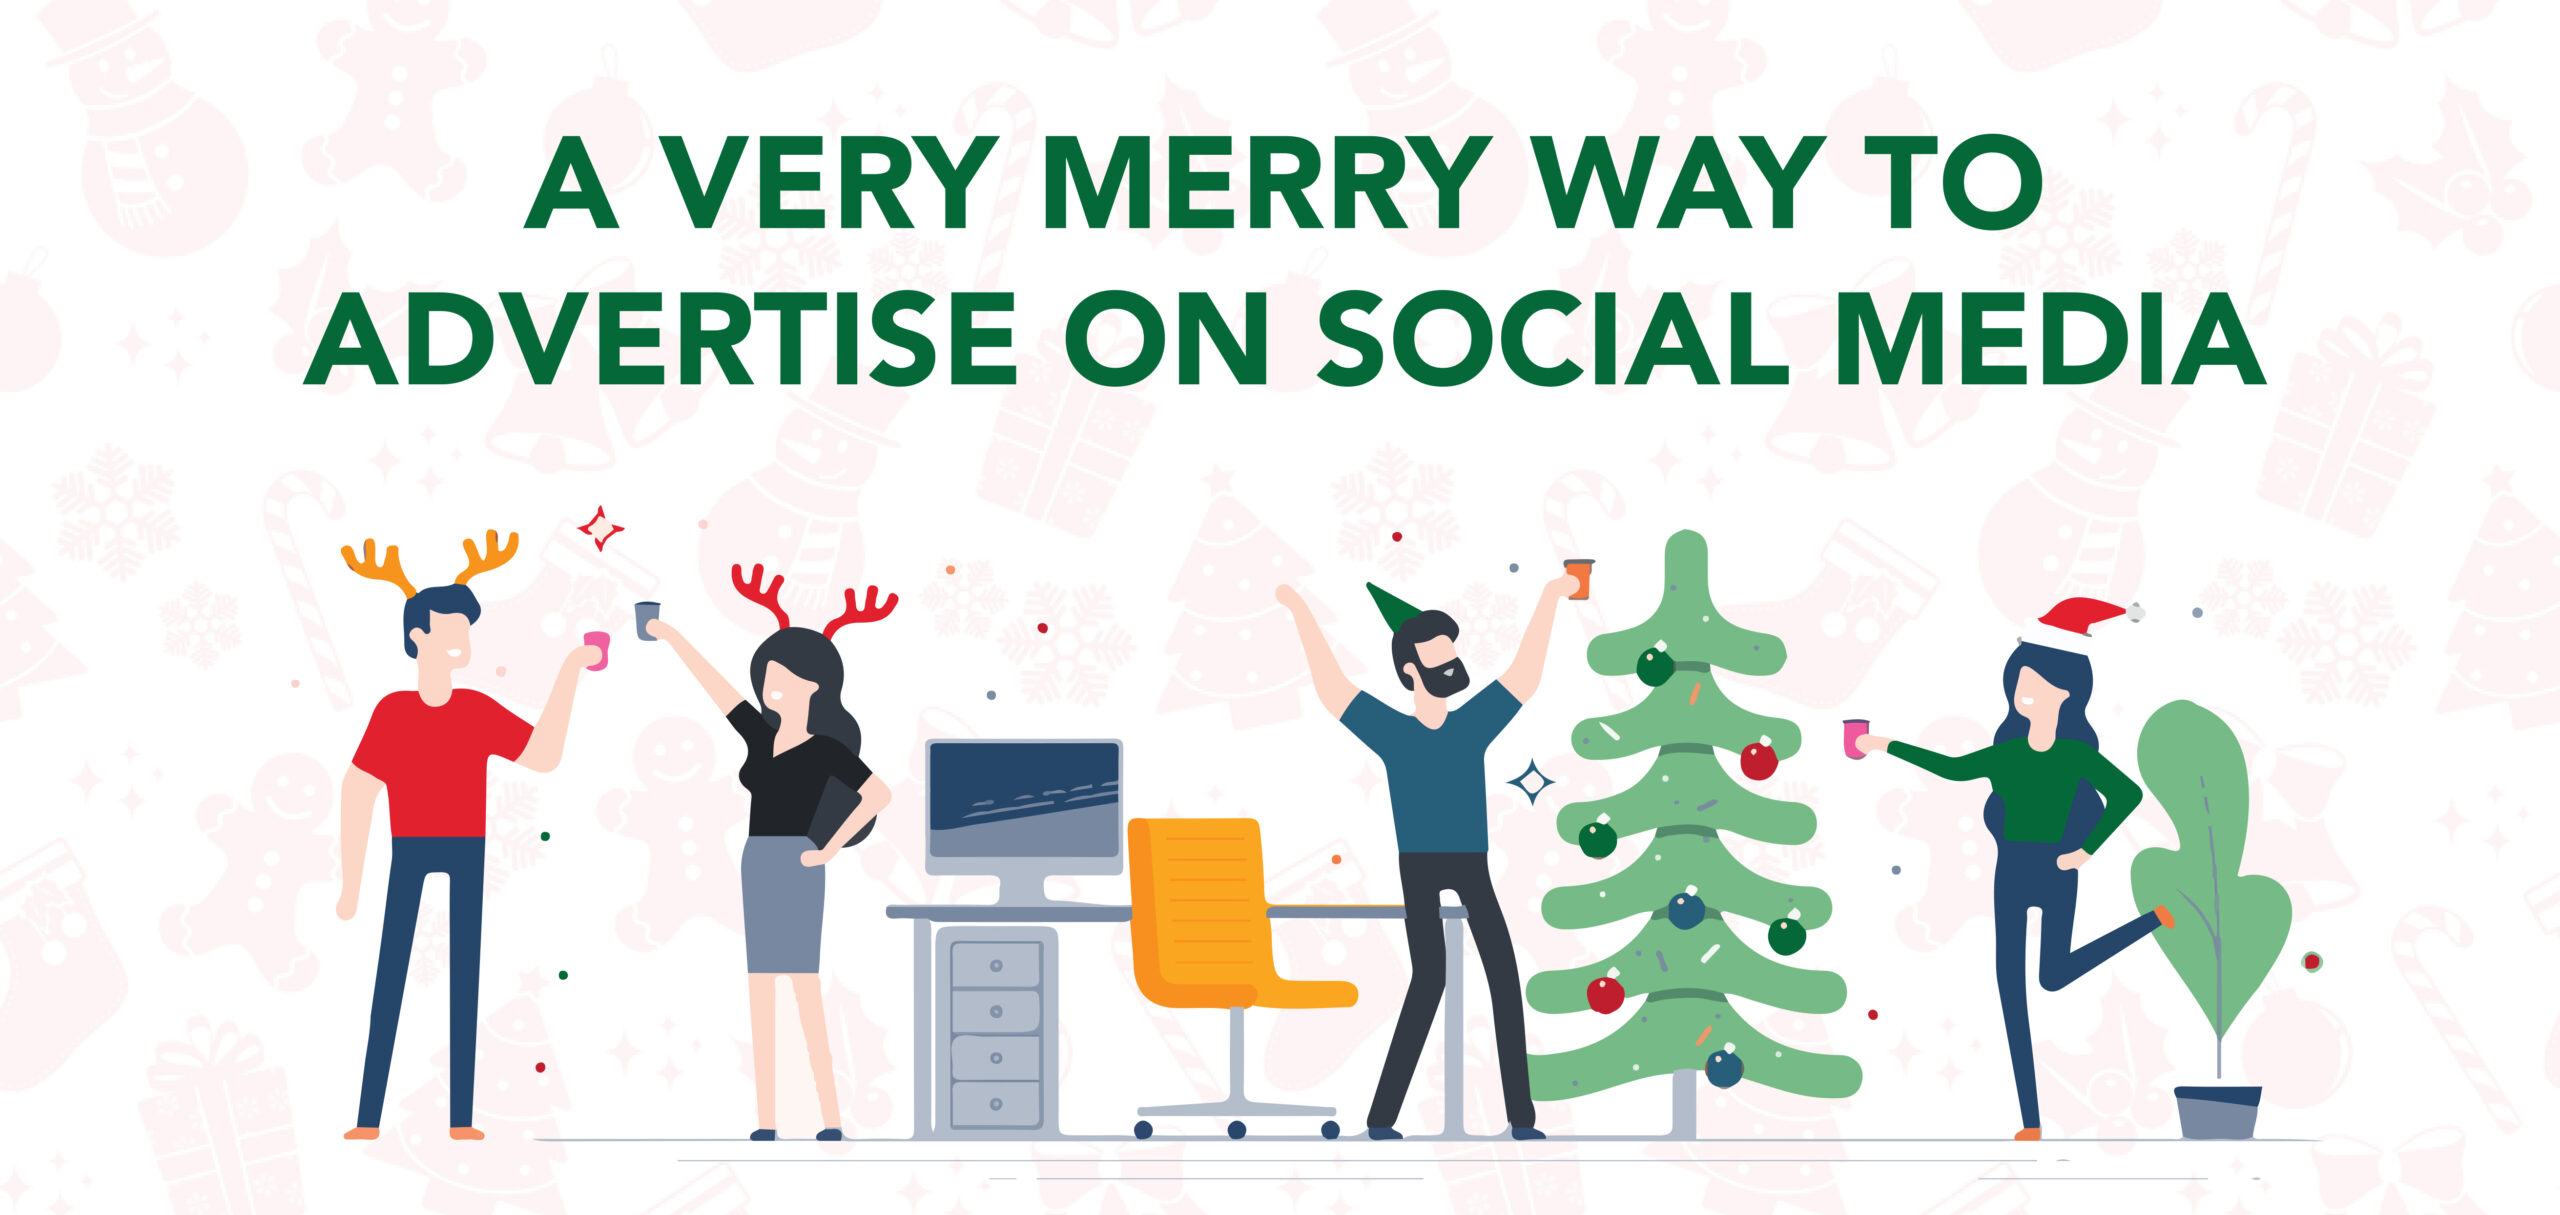 A Very Merry Way To Advertise On Social Media